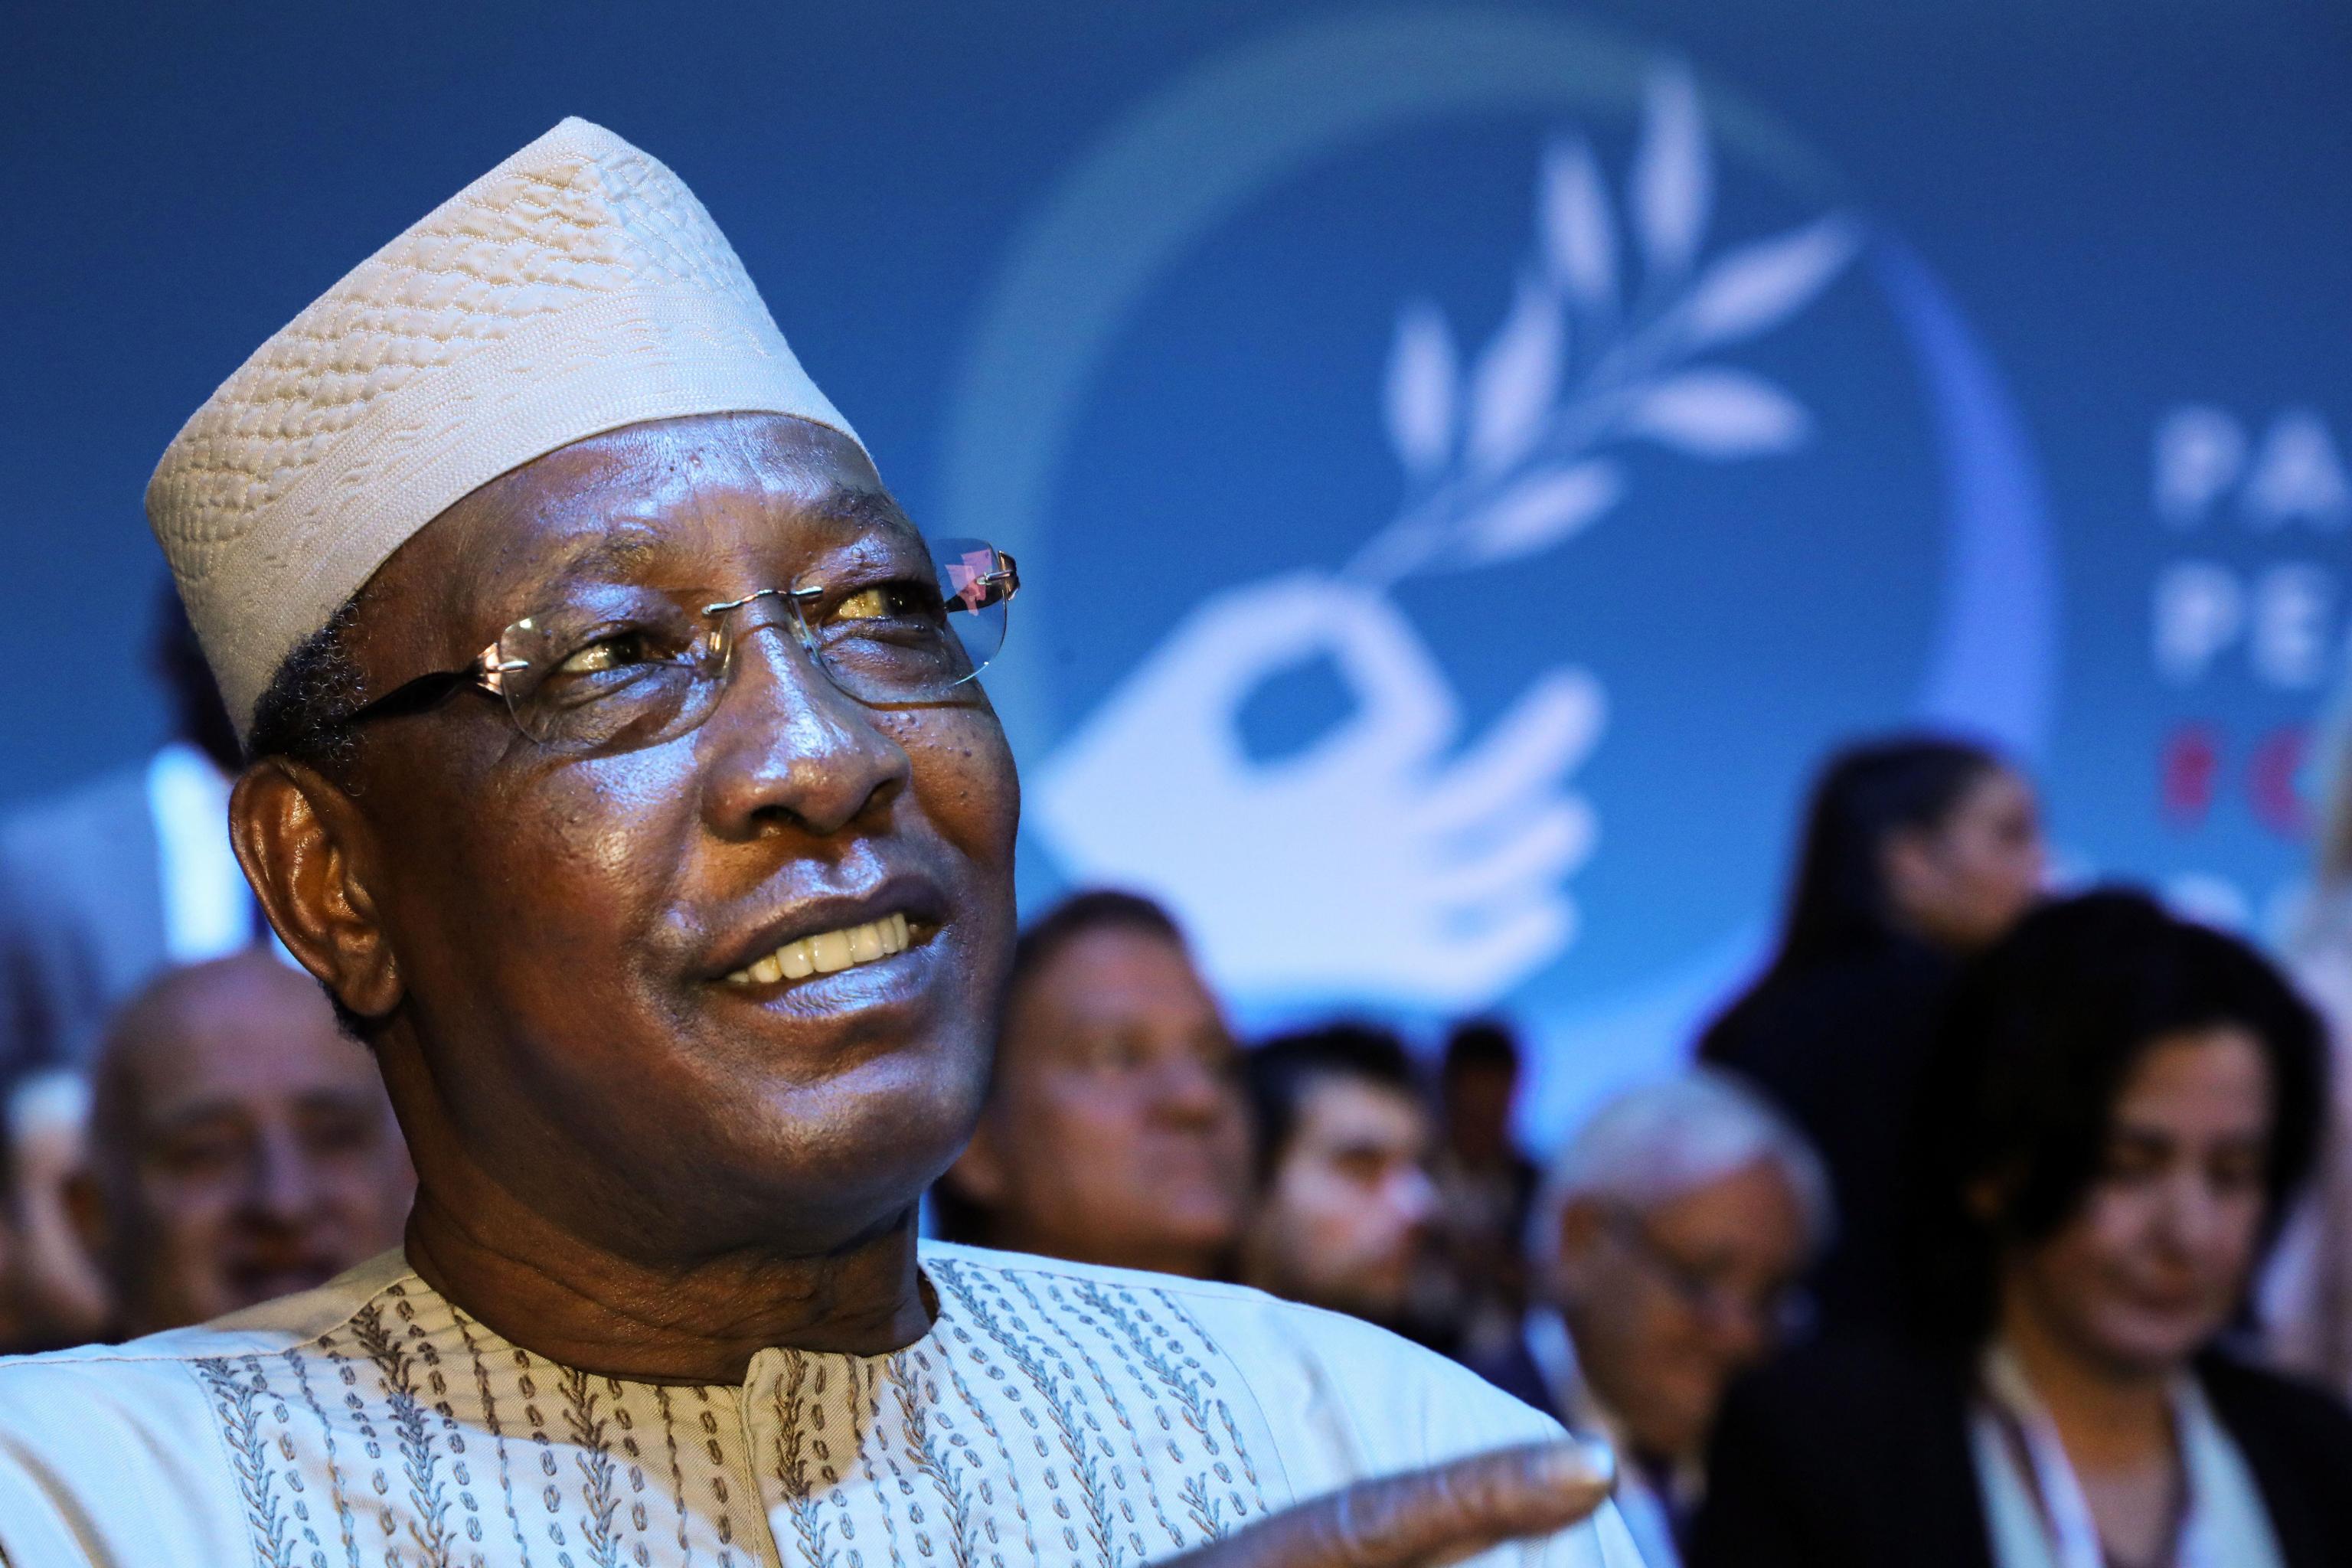 epa07990149 Chadian President Idriss Deby attends the plenary session of the Paris Peace Forum, in Paris, France, 12 November 2019. The international event on global governance issues and multilateralism takes place on 12 to 13 November in Paris.  EPA/LUDOVIC MARIN / POOL MAXPPP OUT